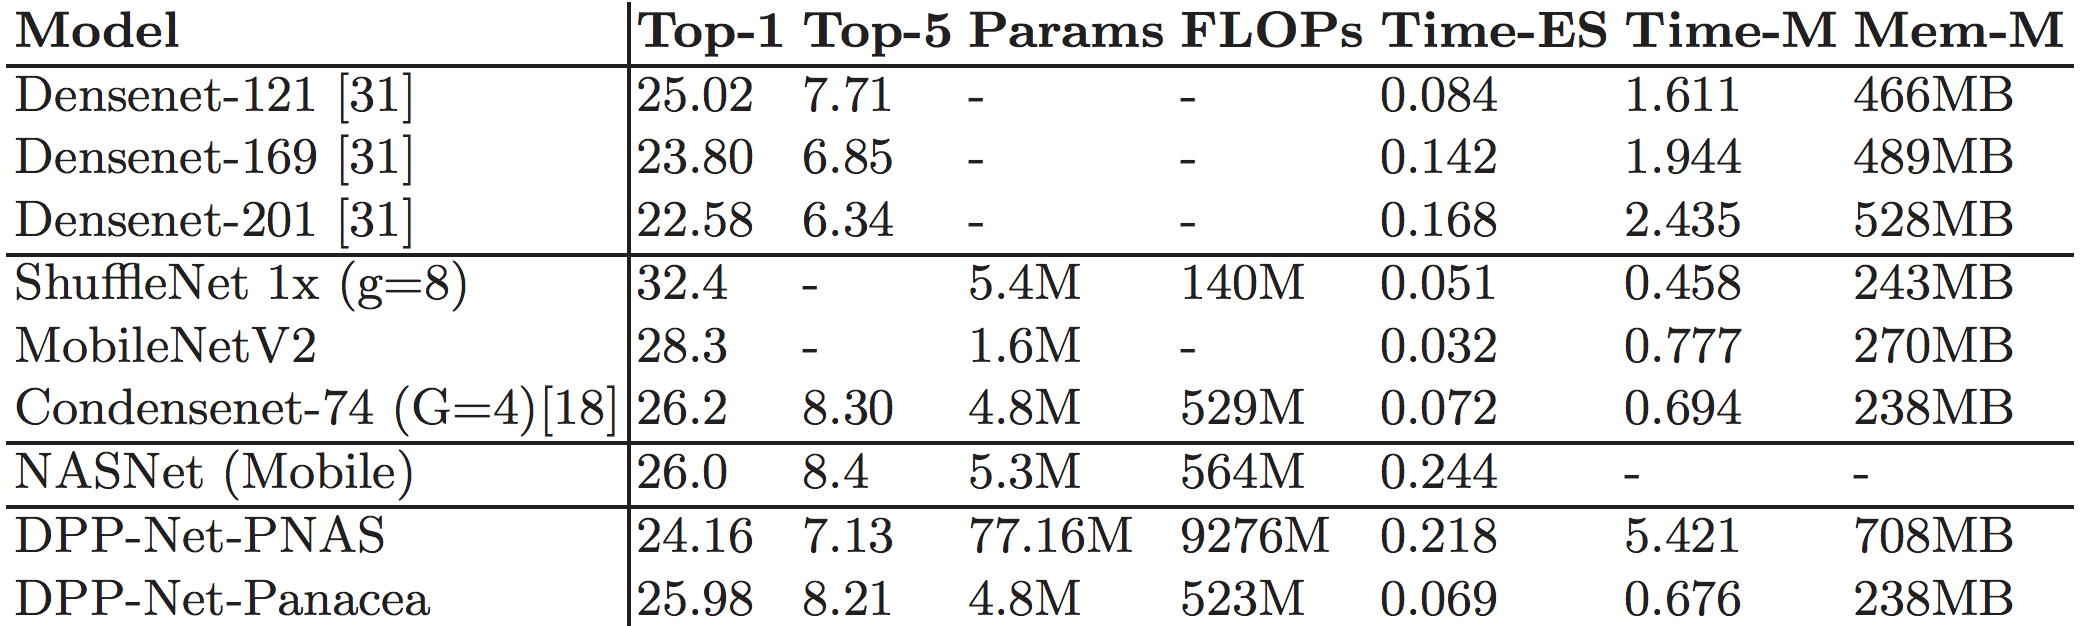 Table 2. ImageNet Classification Results. Time-M and Mem-M is the inference time and memory usage of the corresponding model on our mobile phone using ONNX and Caffe2. Due to operations not supported on this framework, we cannot measure the inference time and memory usage of NASNet (Mobile) on our mobile phone.